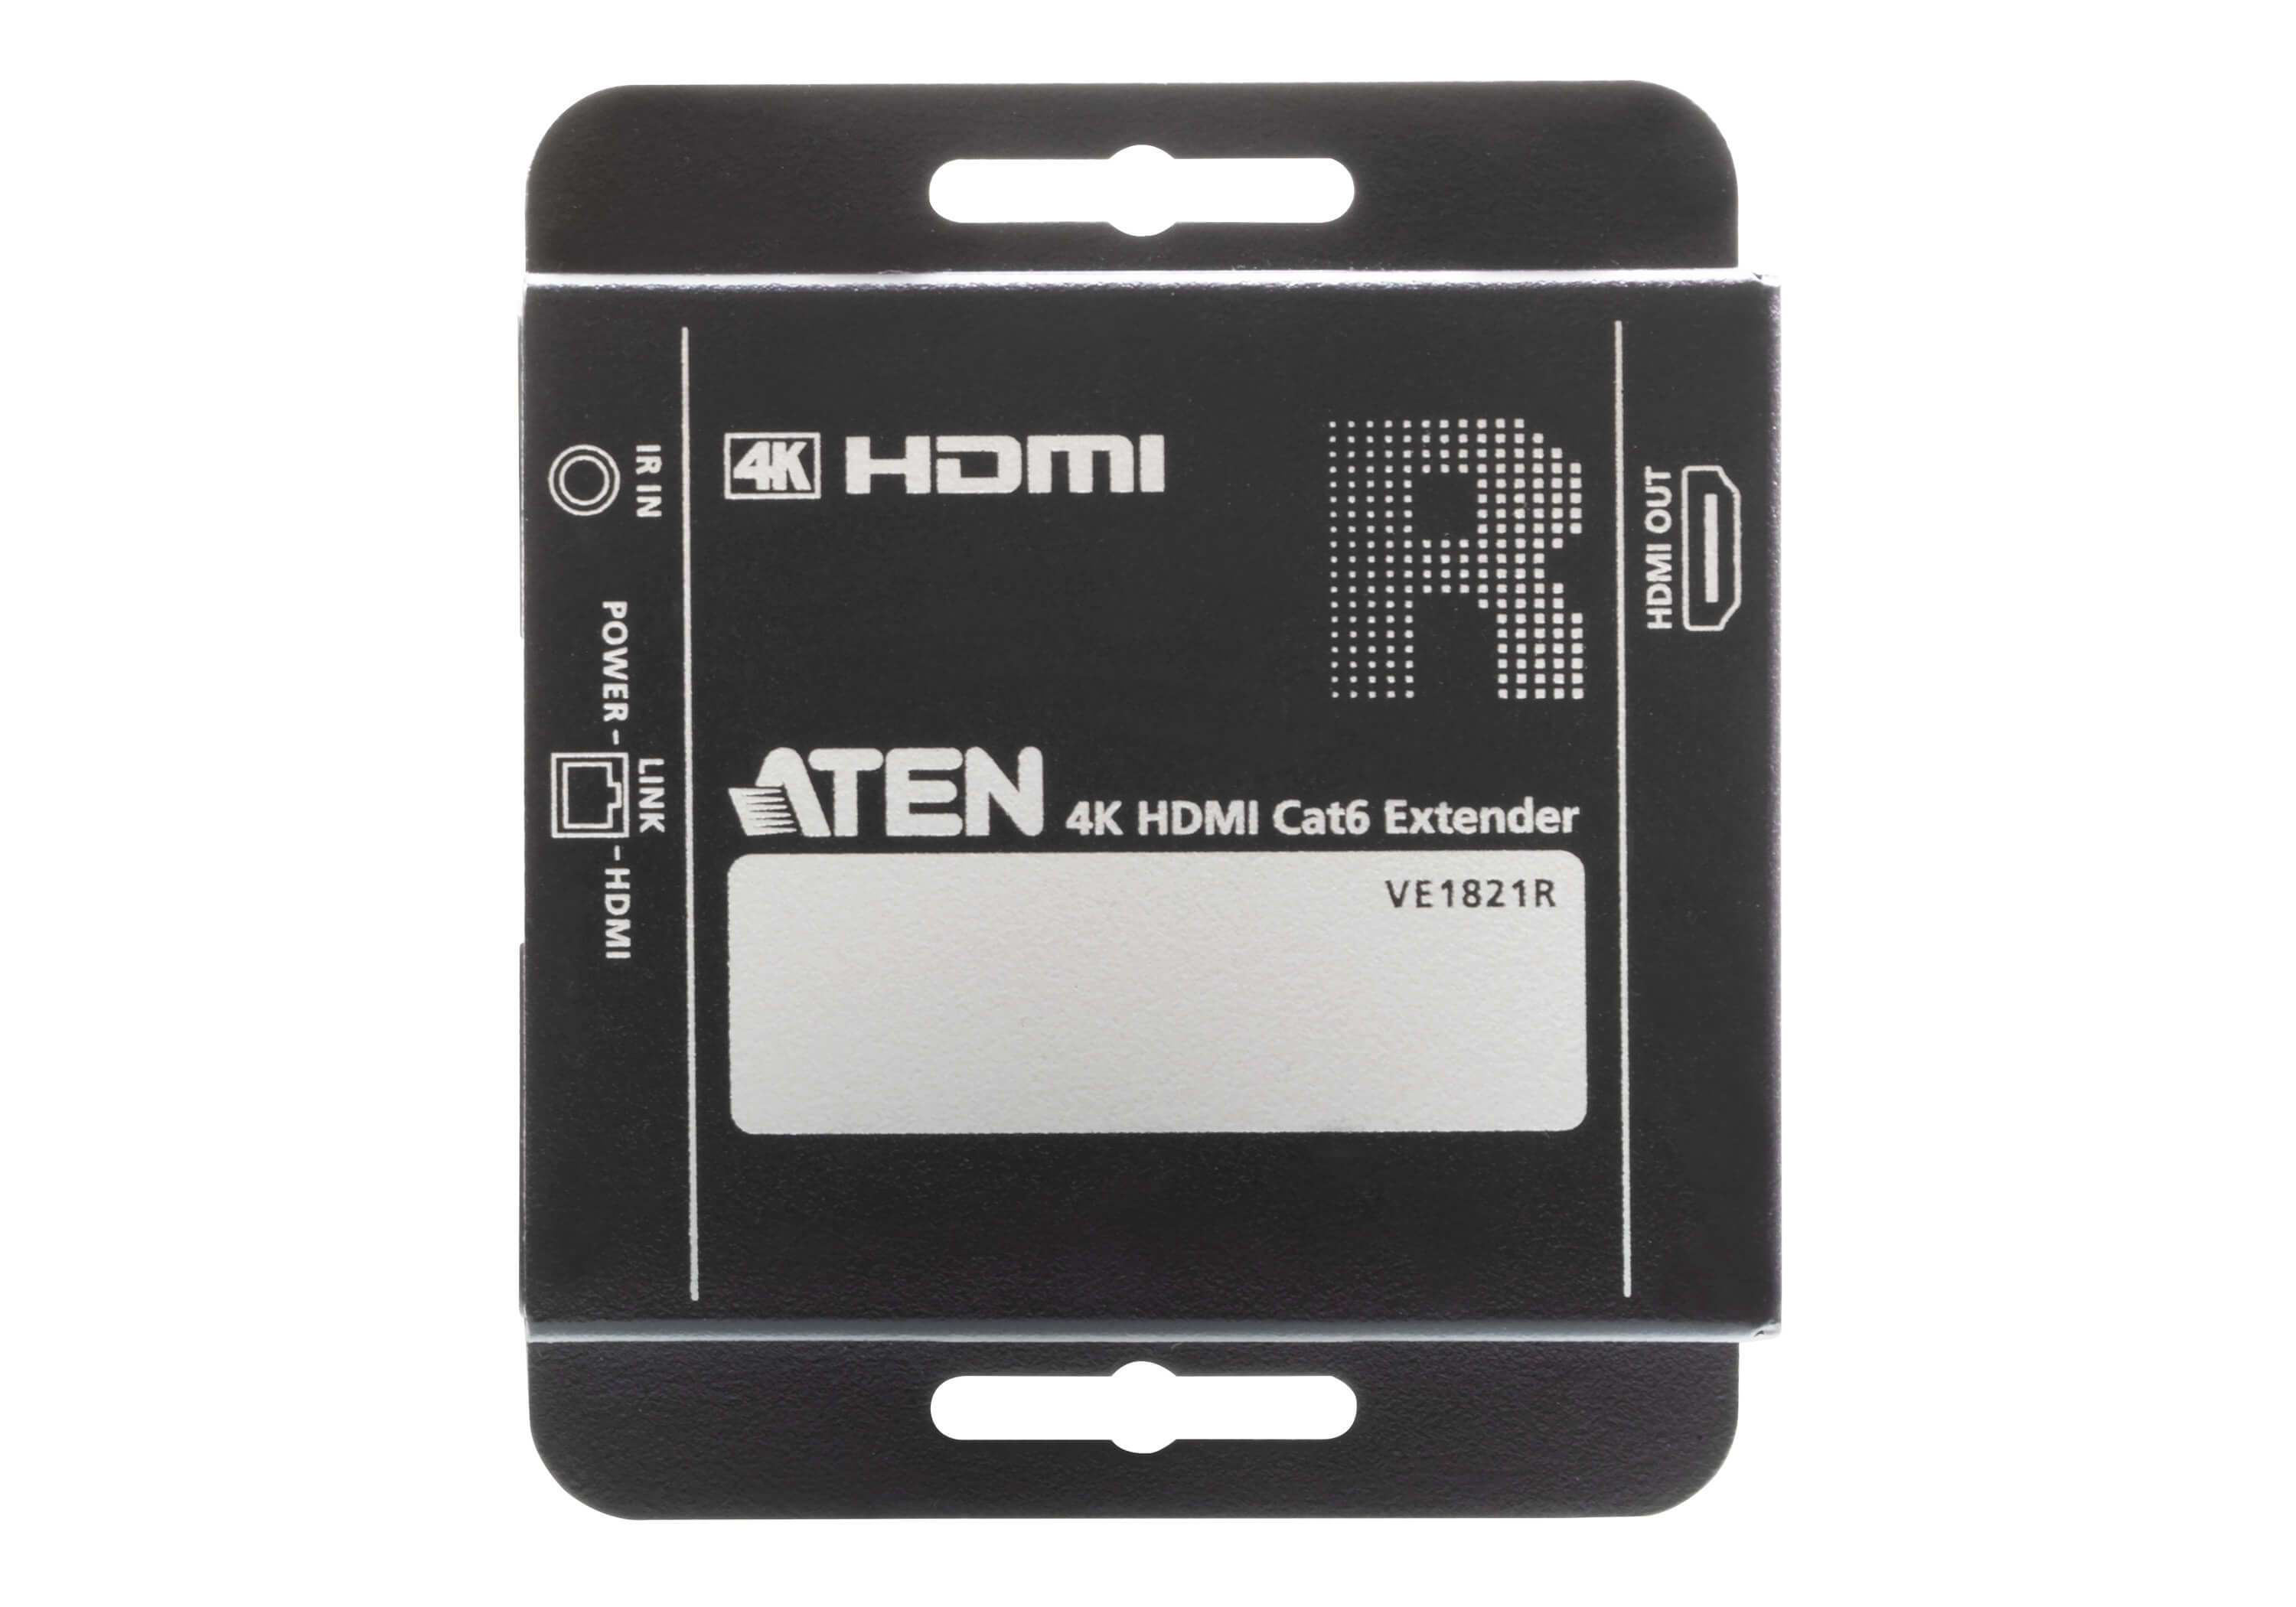 Aten 4K HDMI Cat 6 Extender -VE1821 (3 Year Manufacture Local Warranty In Singapore)